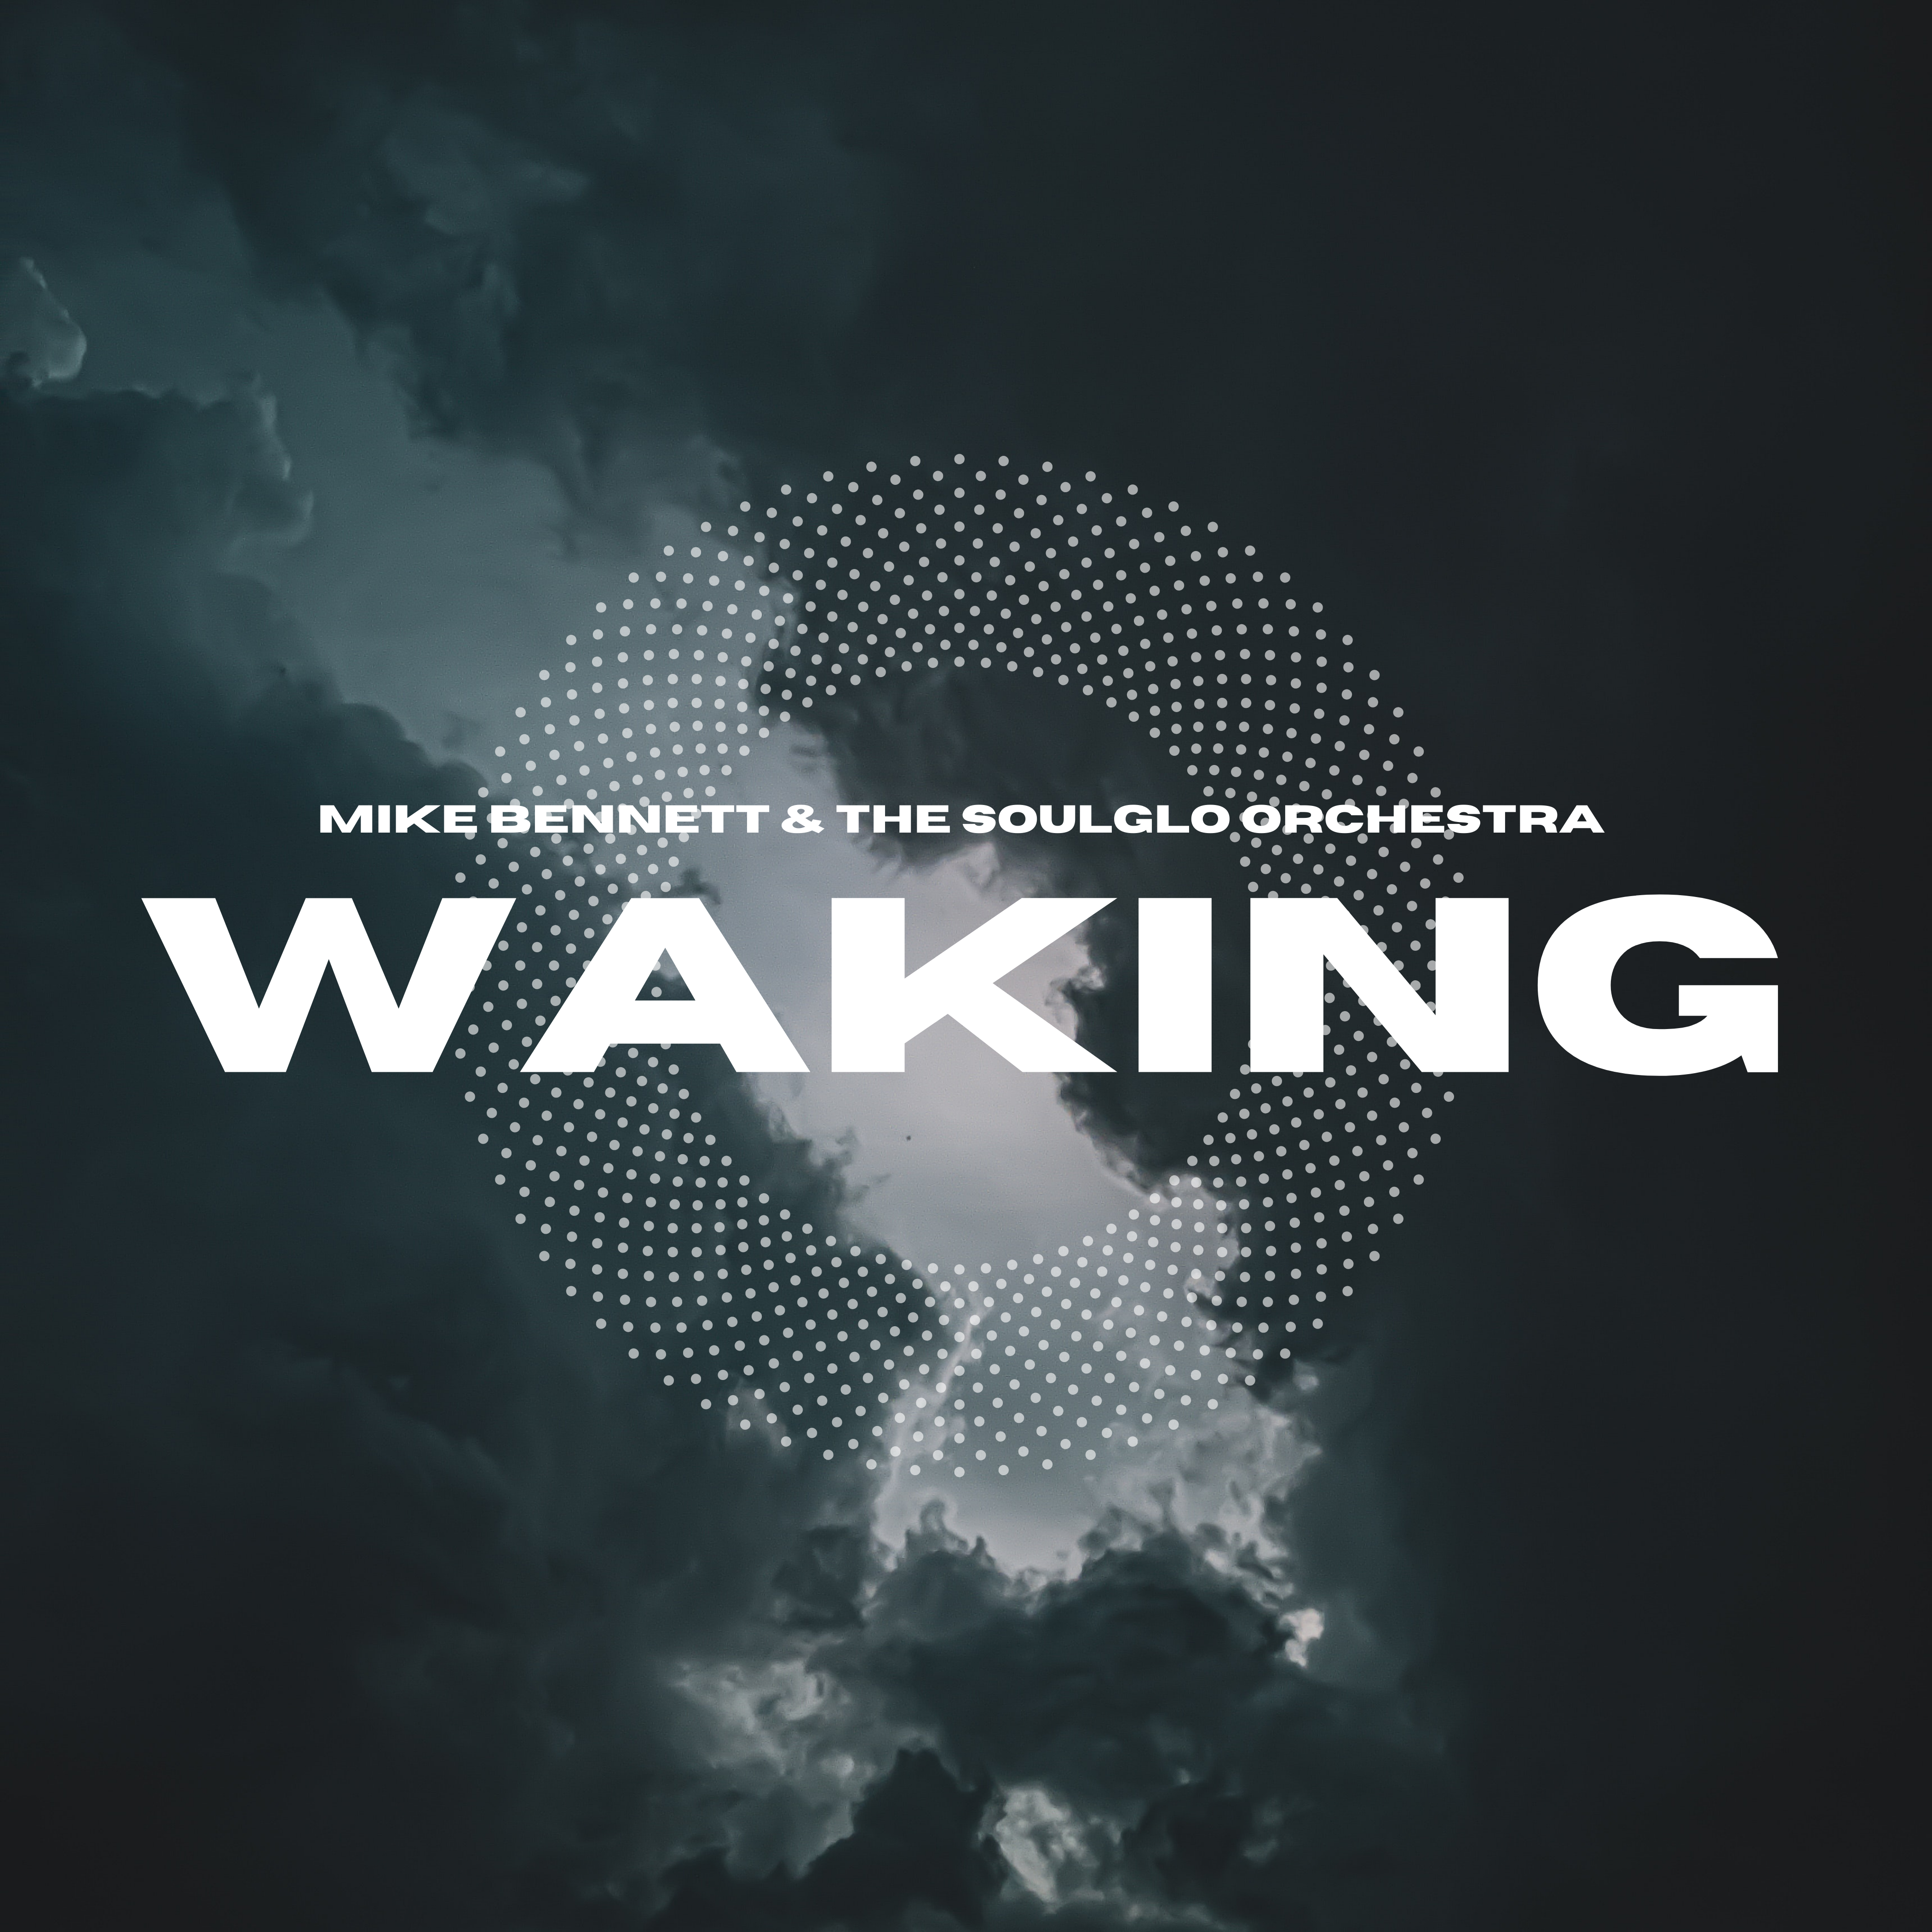 Mike Bennet and Soul Glo Orchestra - Waking Album Art